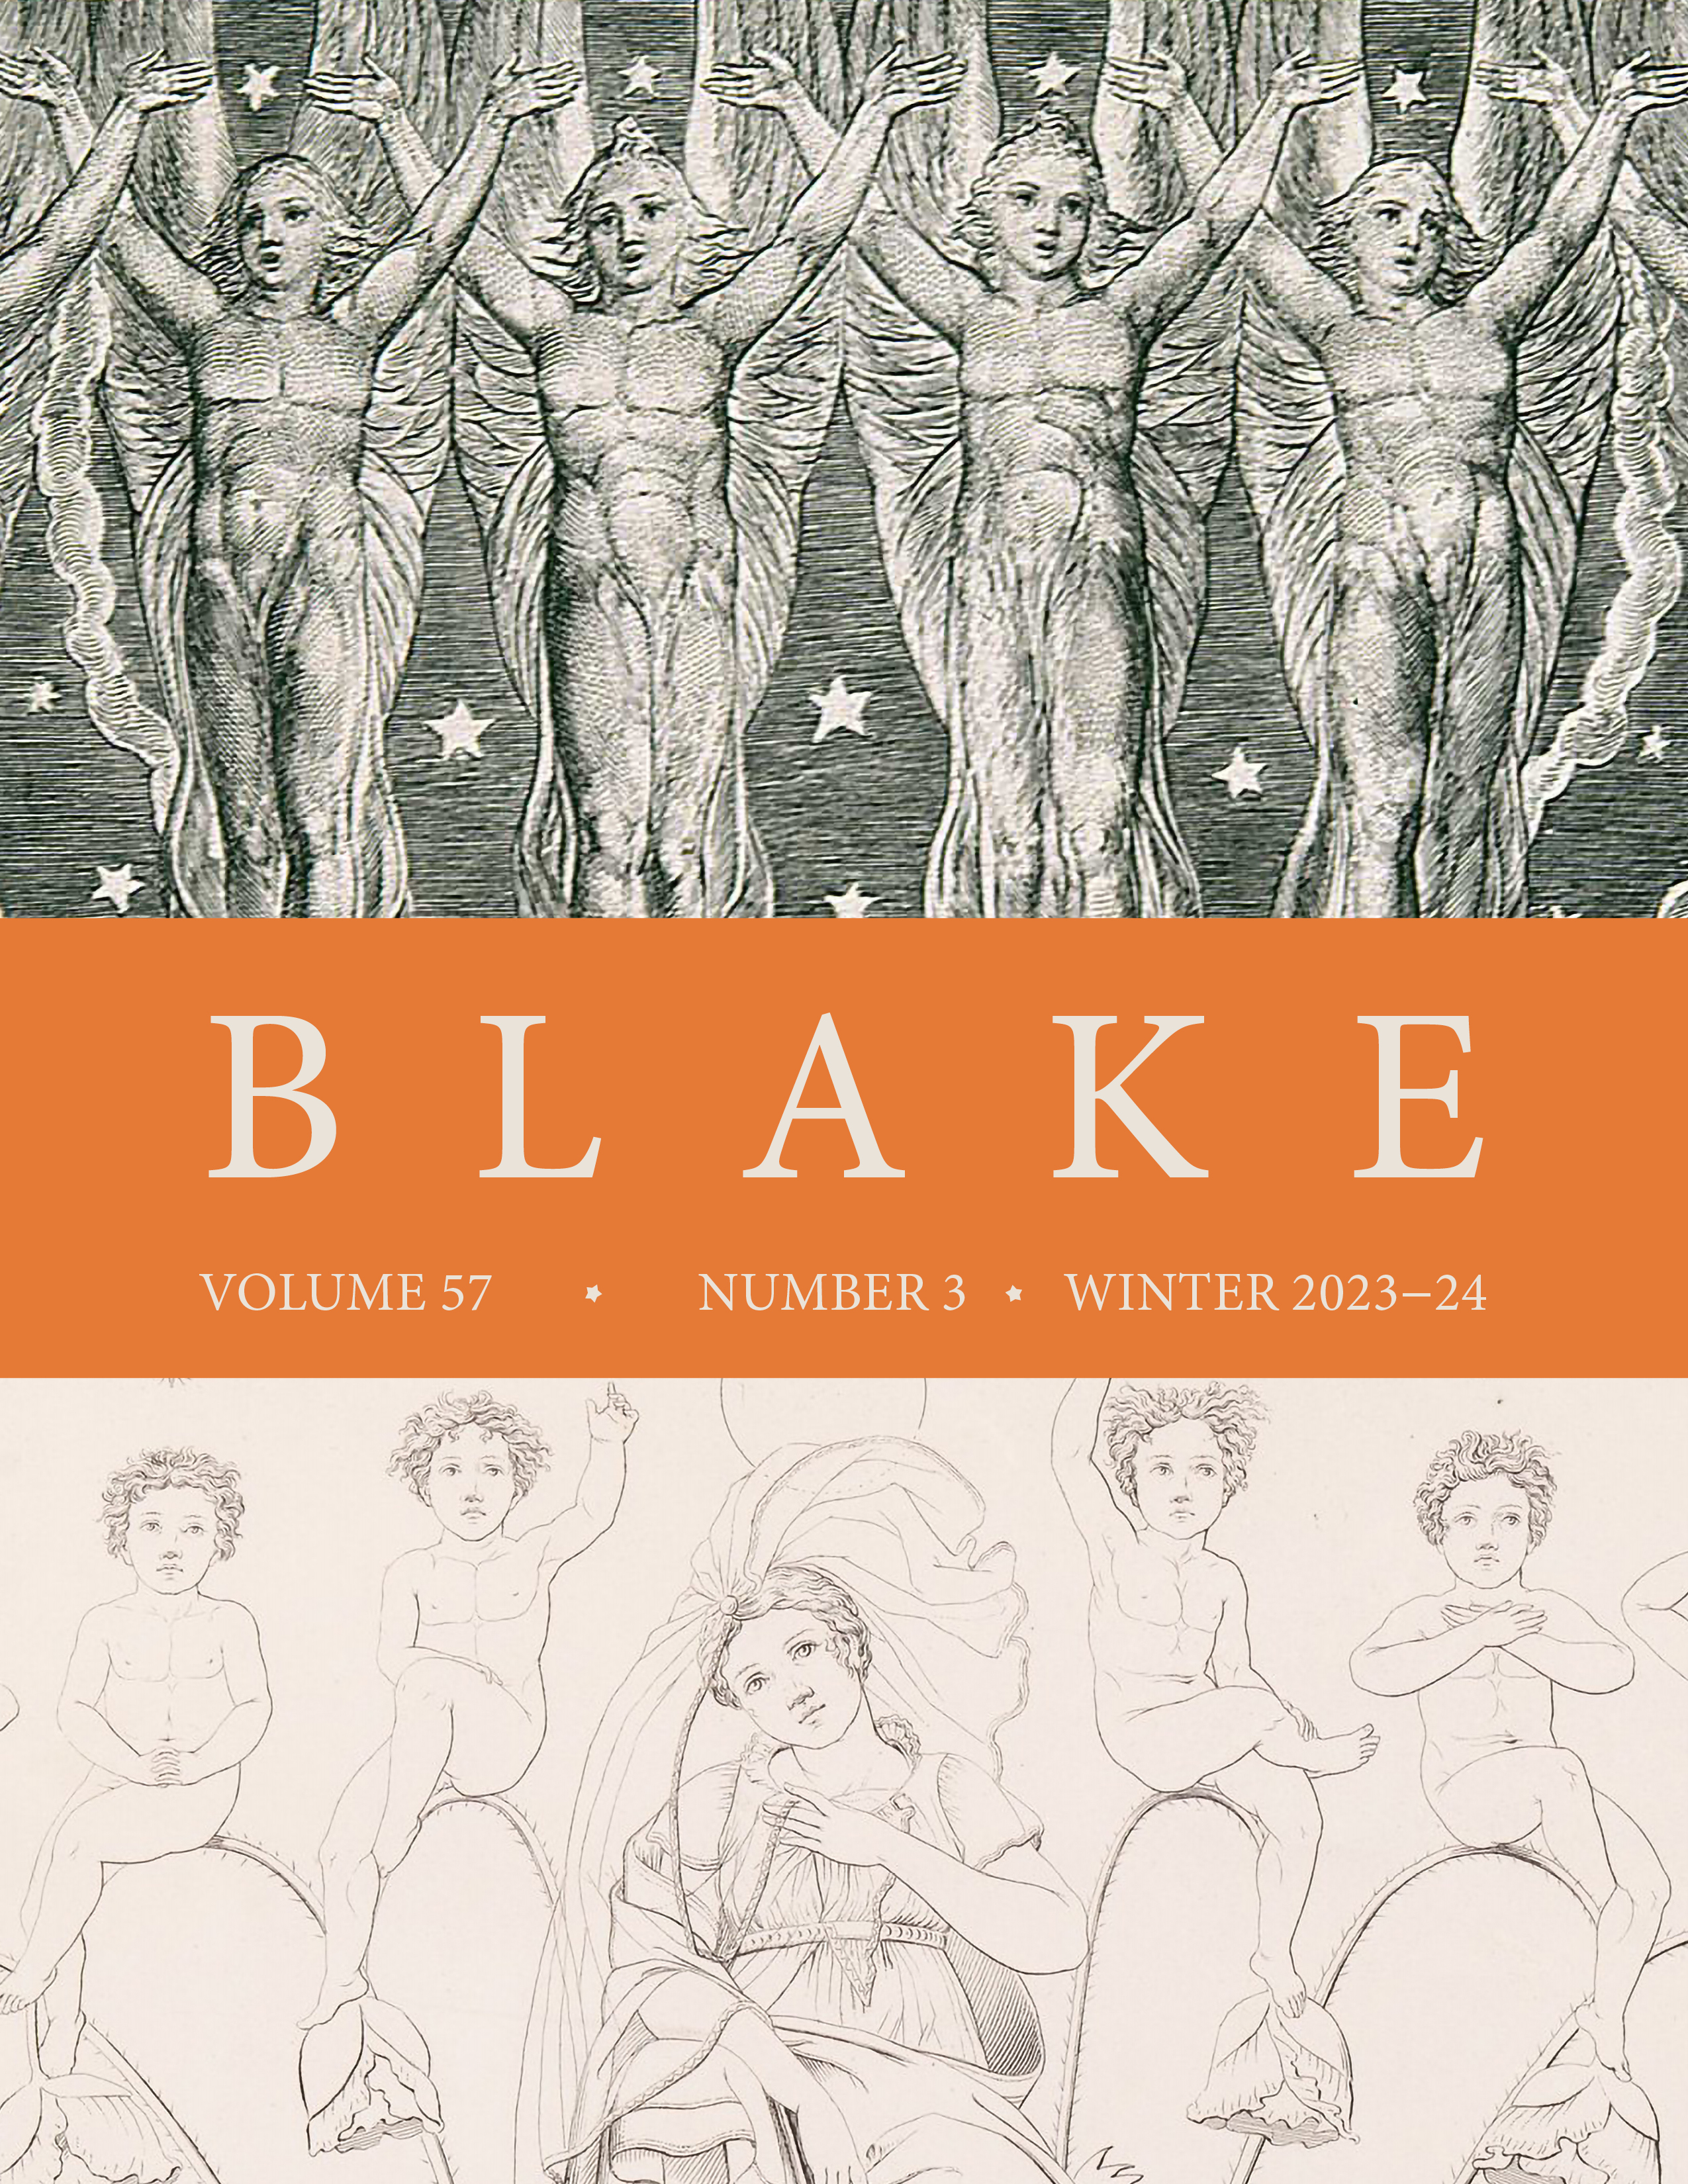 Blake, "When the Morning Stars Sang Together,"  and Philipp Otto Runge, "Night"